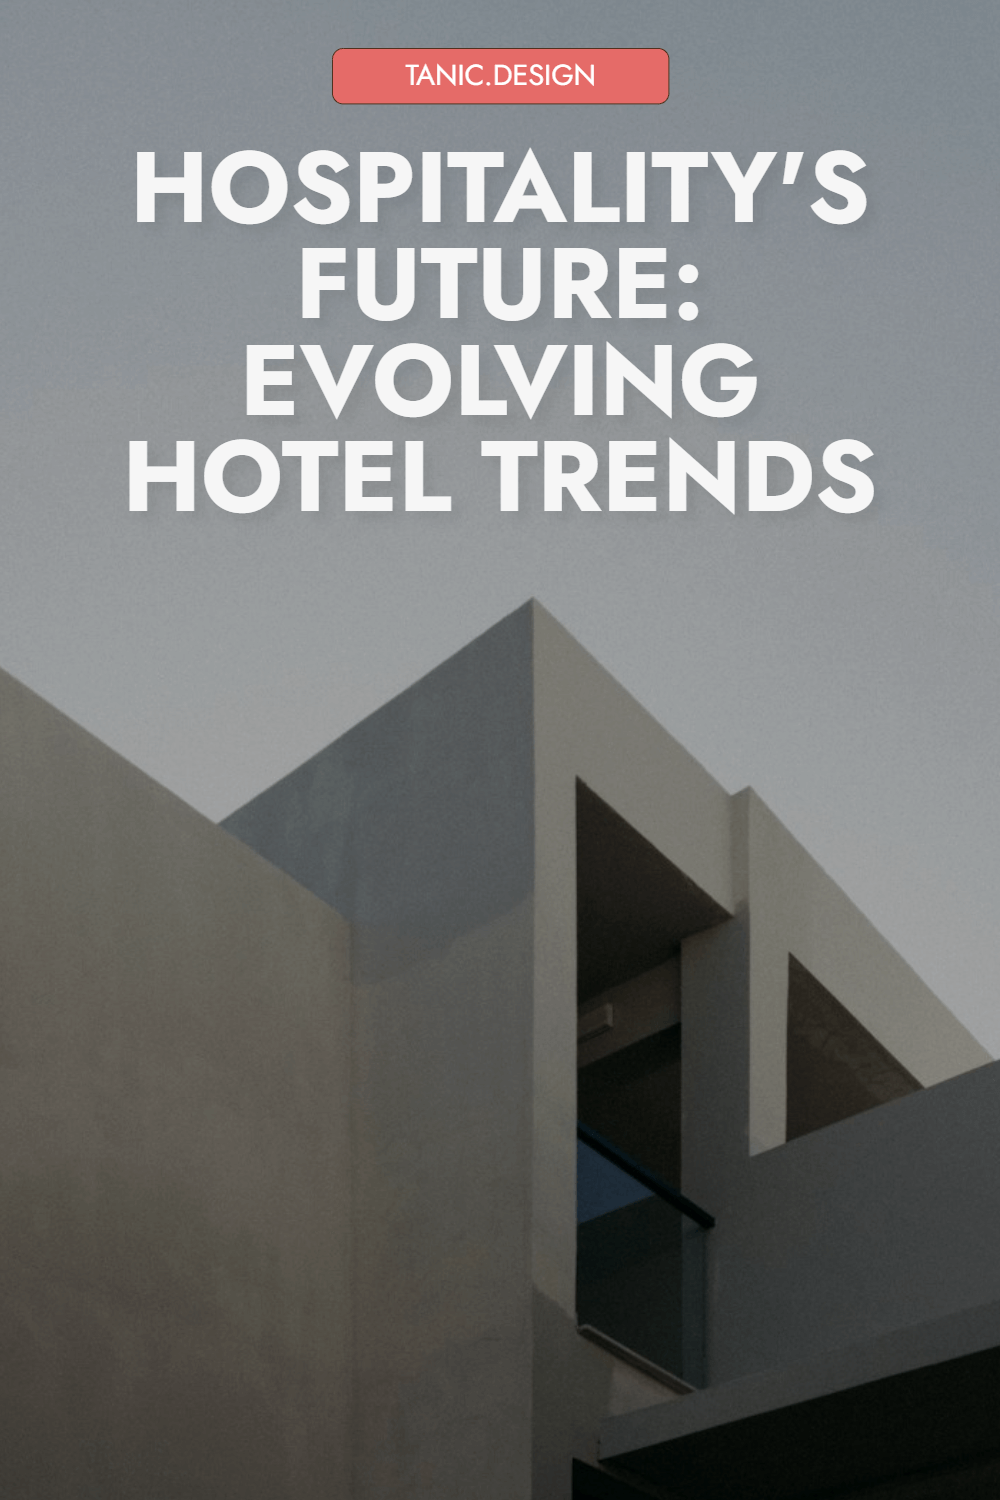 Evolving Trends in Hotels